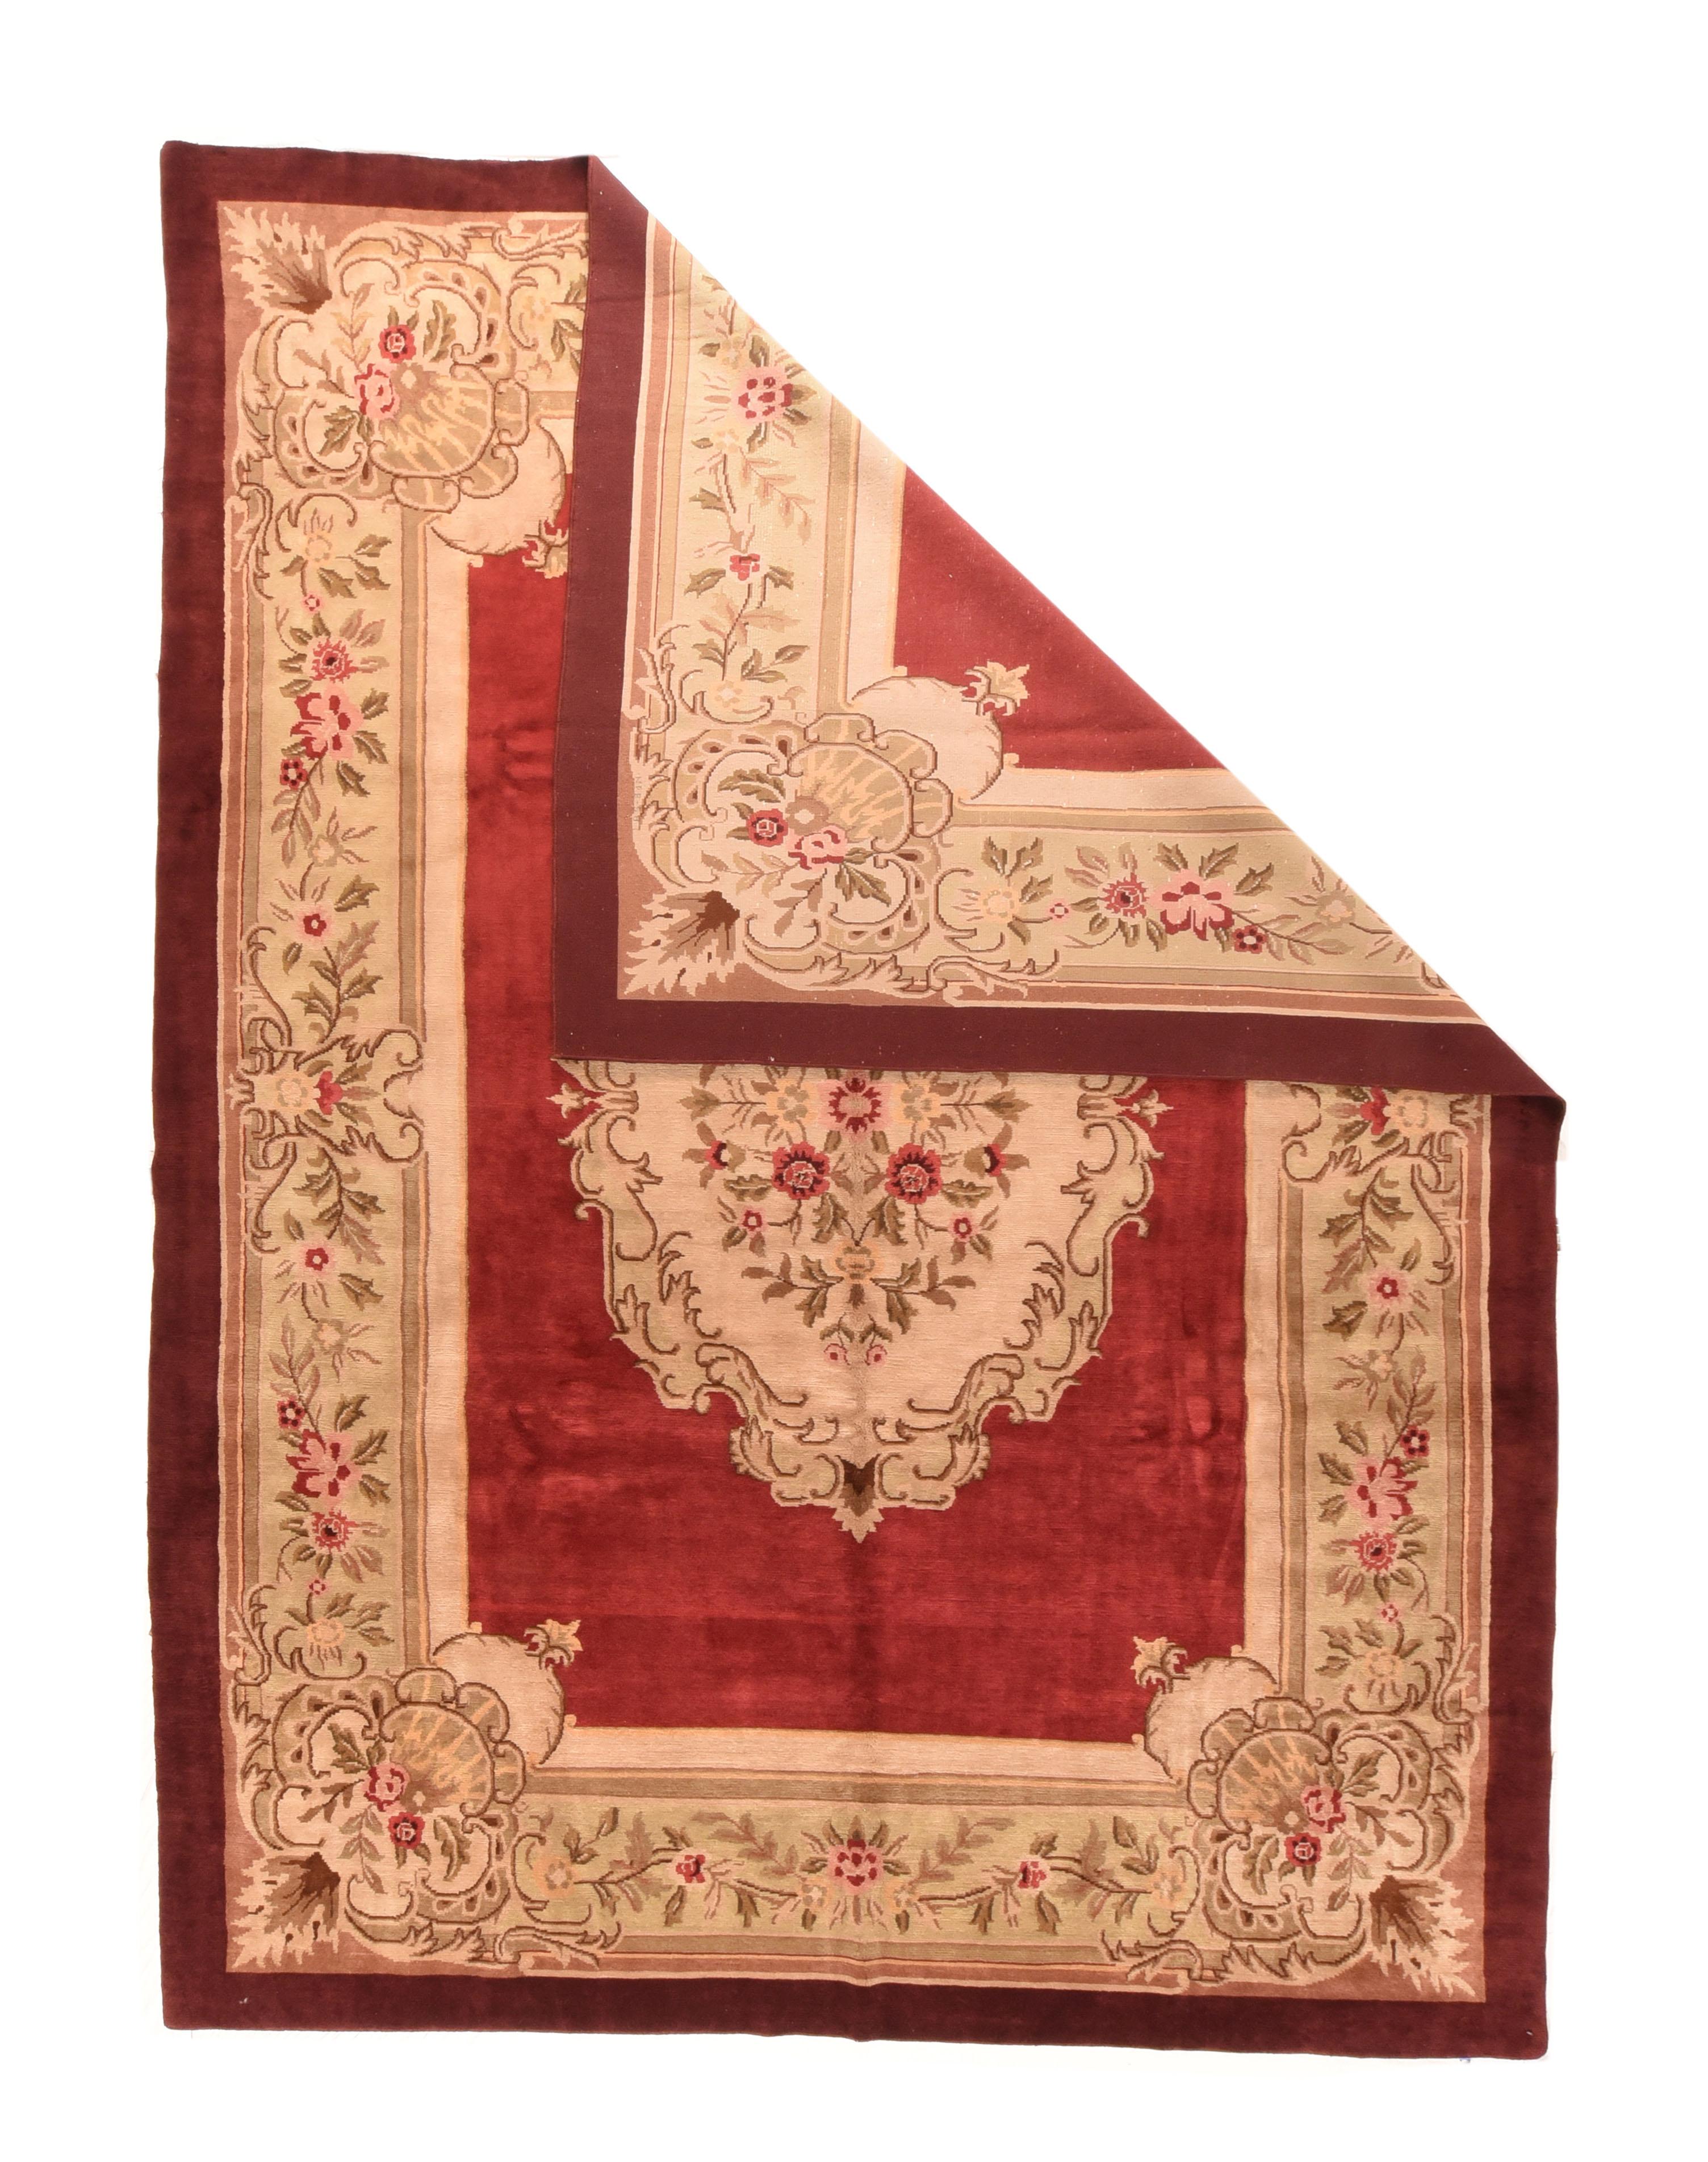 A rare, vintage French pile carpet from the famed Aubusson flatweave carpet workshops, this moderately woven piece shows a beveled red open field decorated by an oval ecru medallion with an acanthus leaf edge, and rosette and stem centre. Rococo